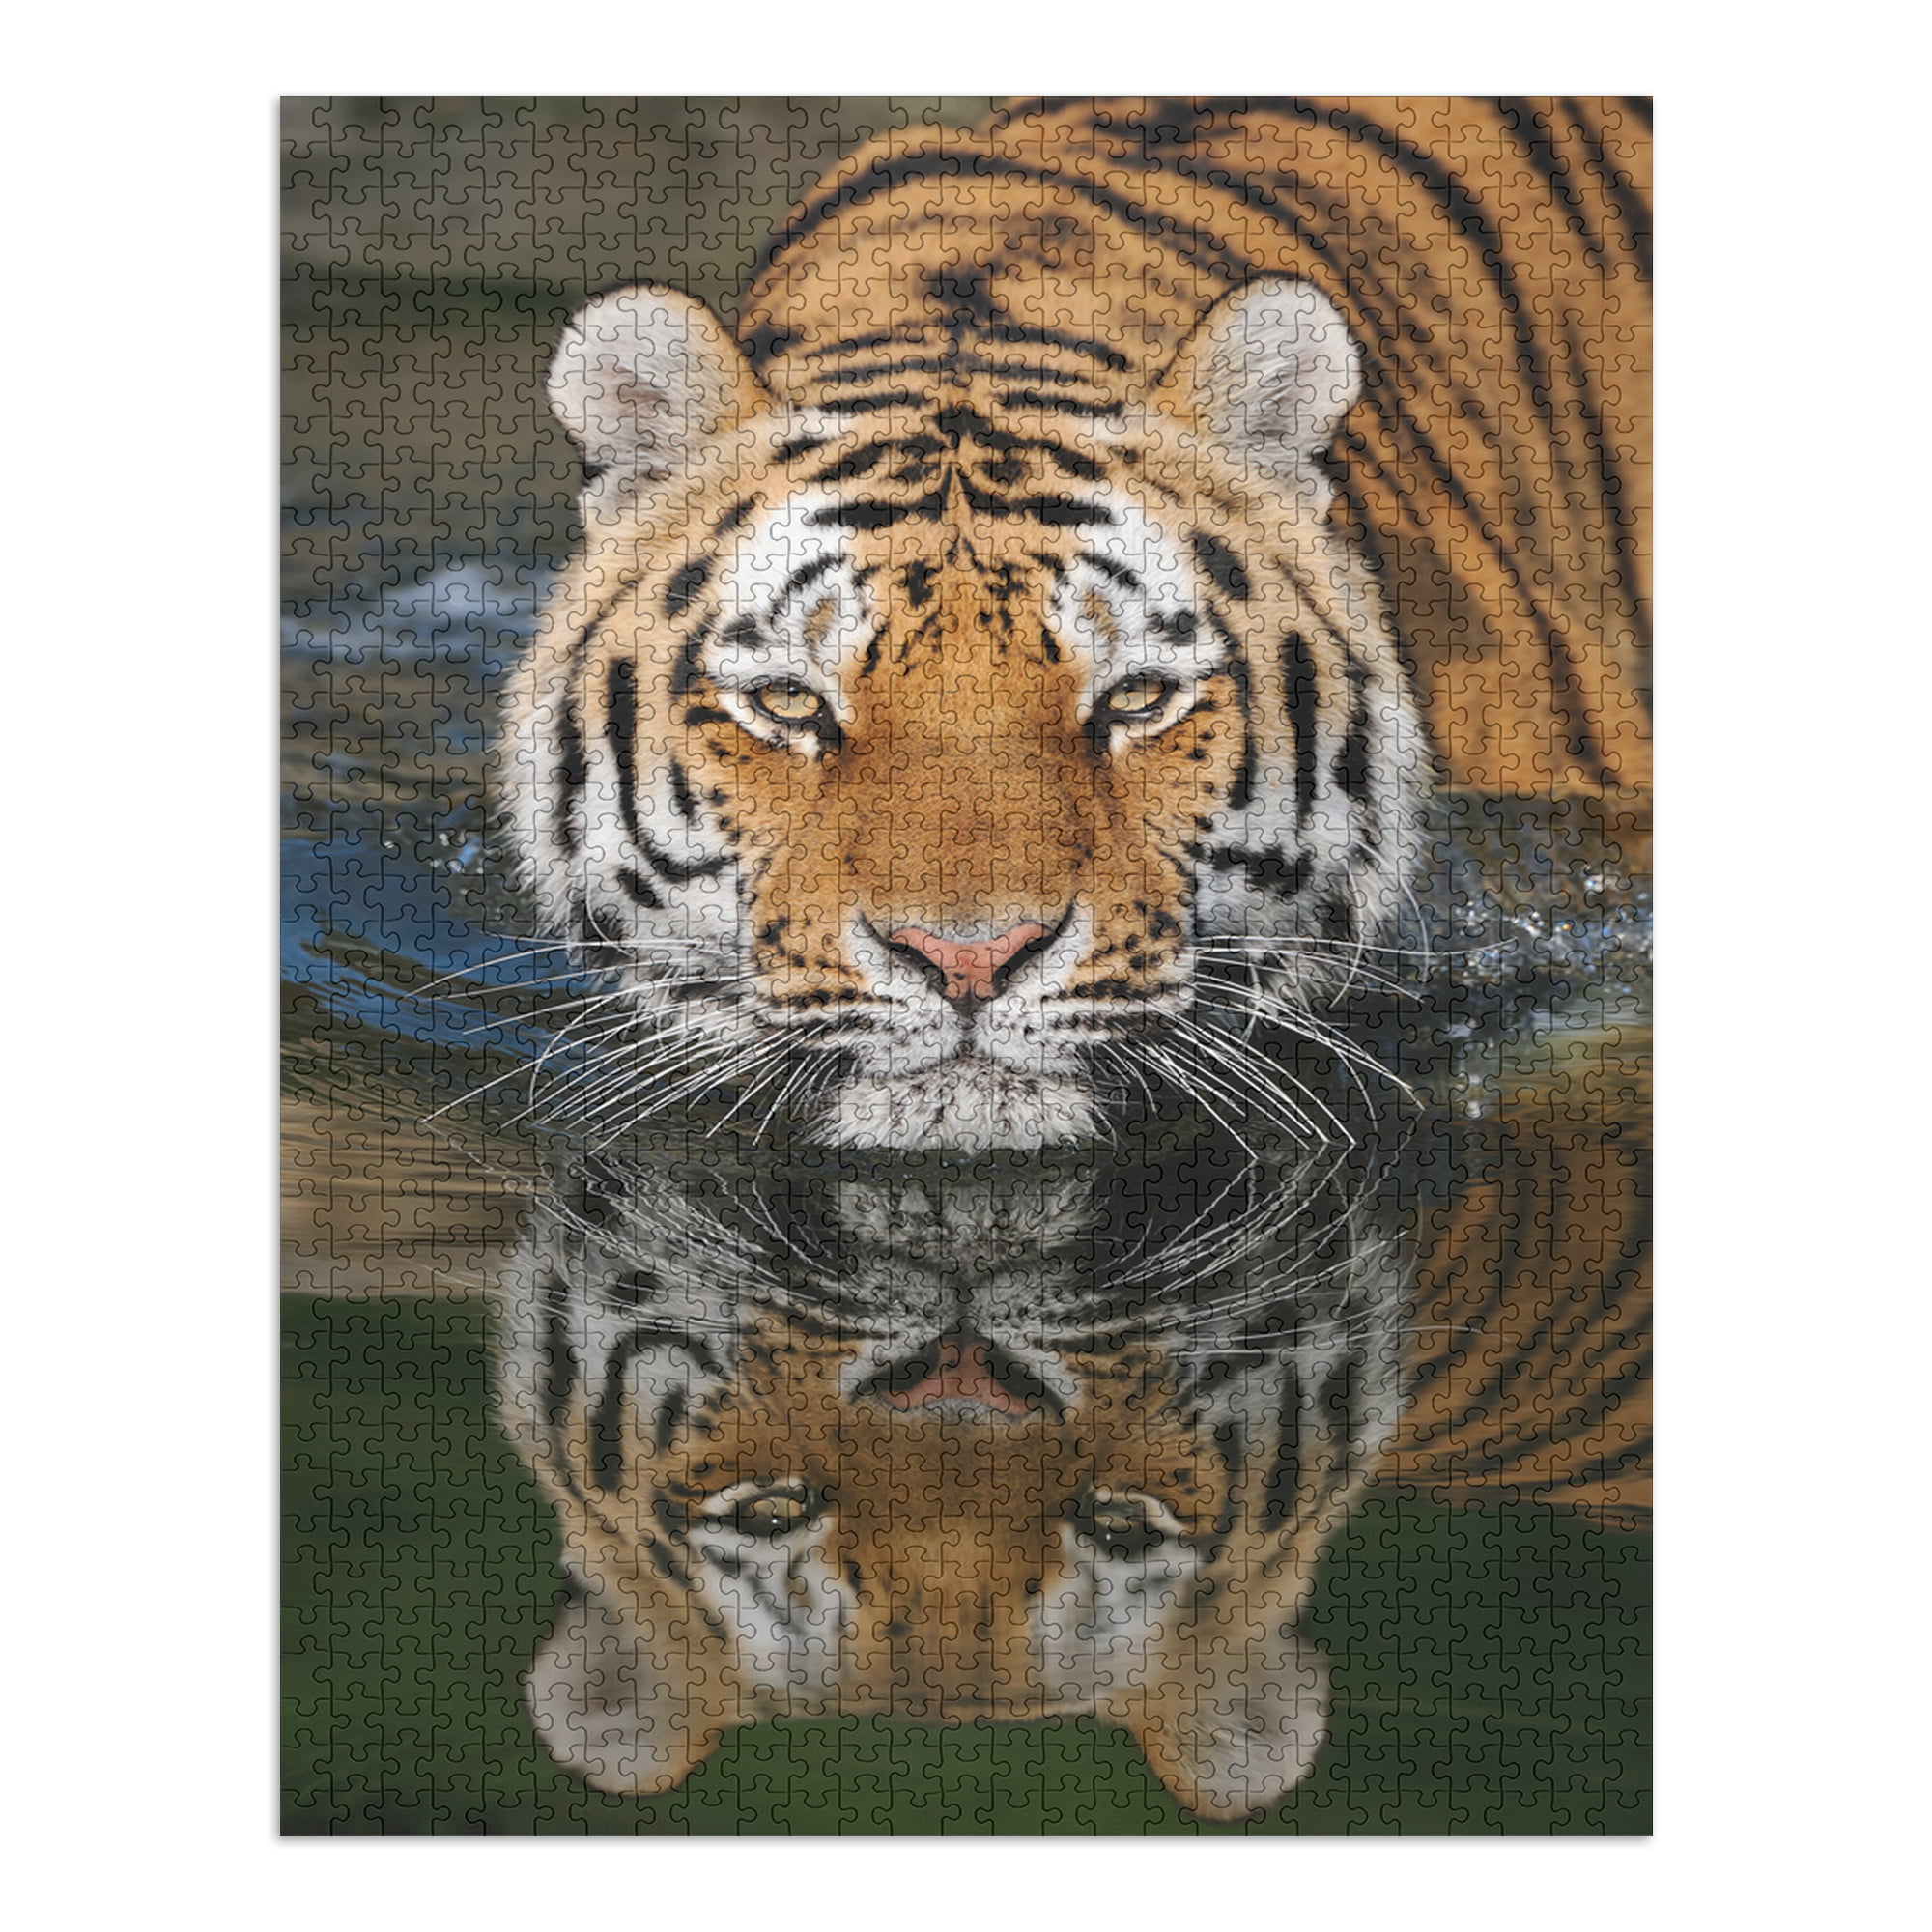 Jigsaw Puzzle 5000 Pieces Adult Family and Friends White Tiger Difficult and challenging Jigsaw Puzzle Suitable for Teacher Gifts and Home Decoration